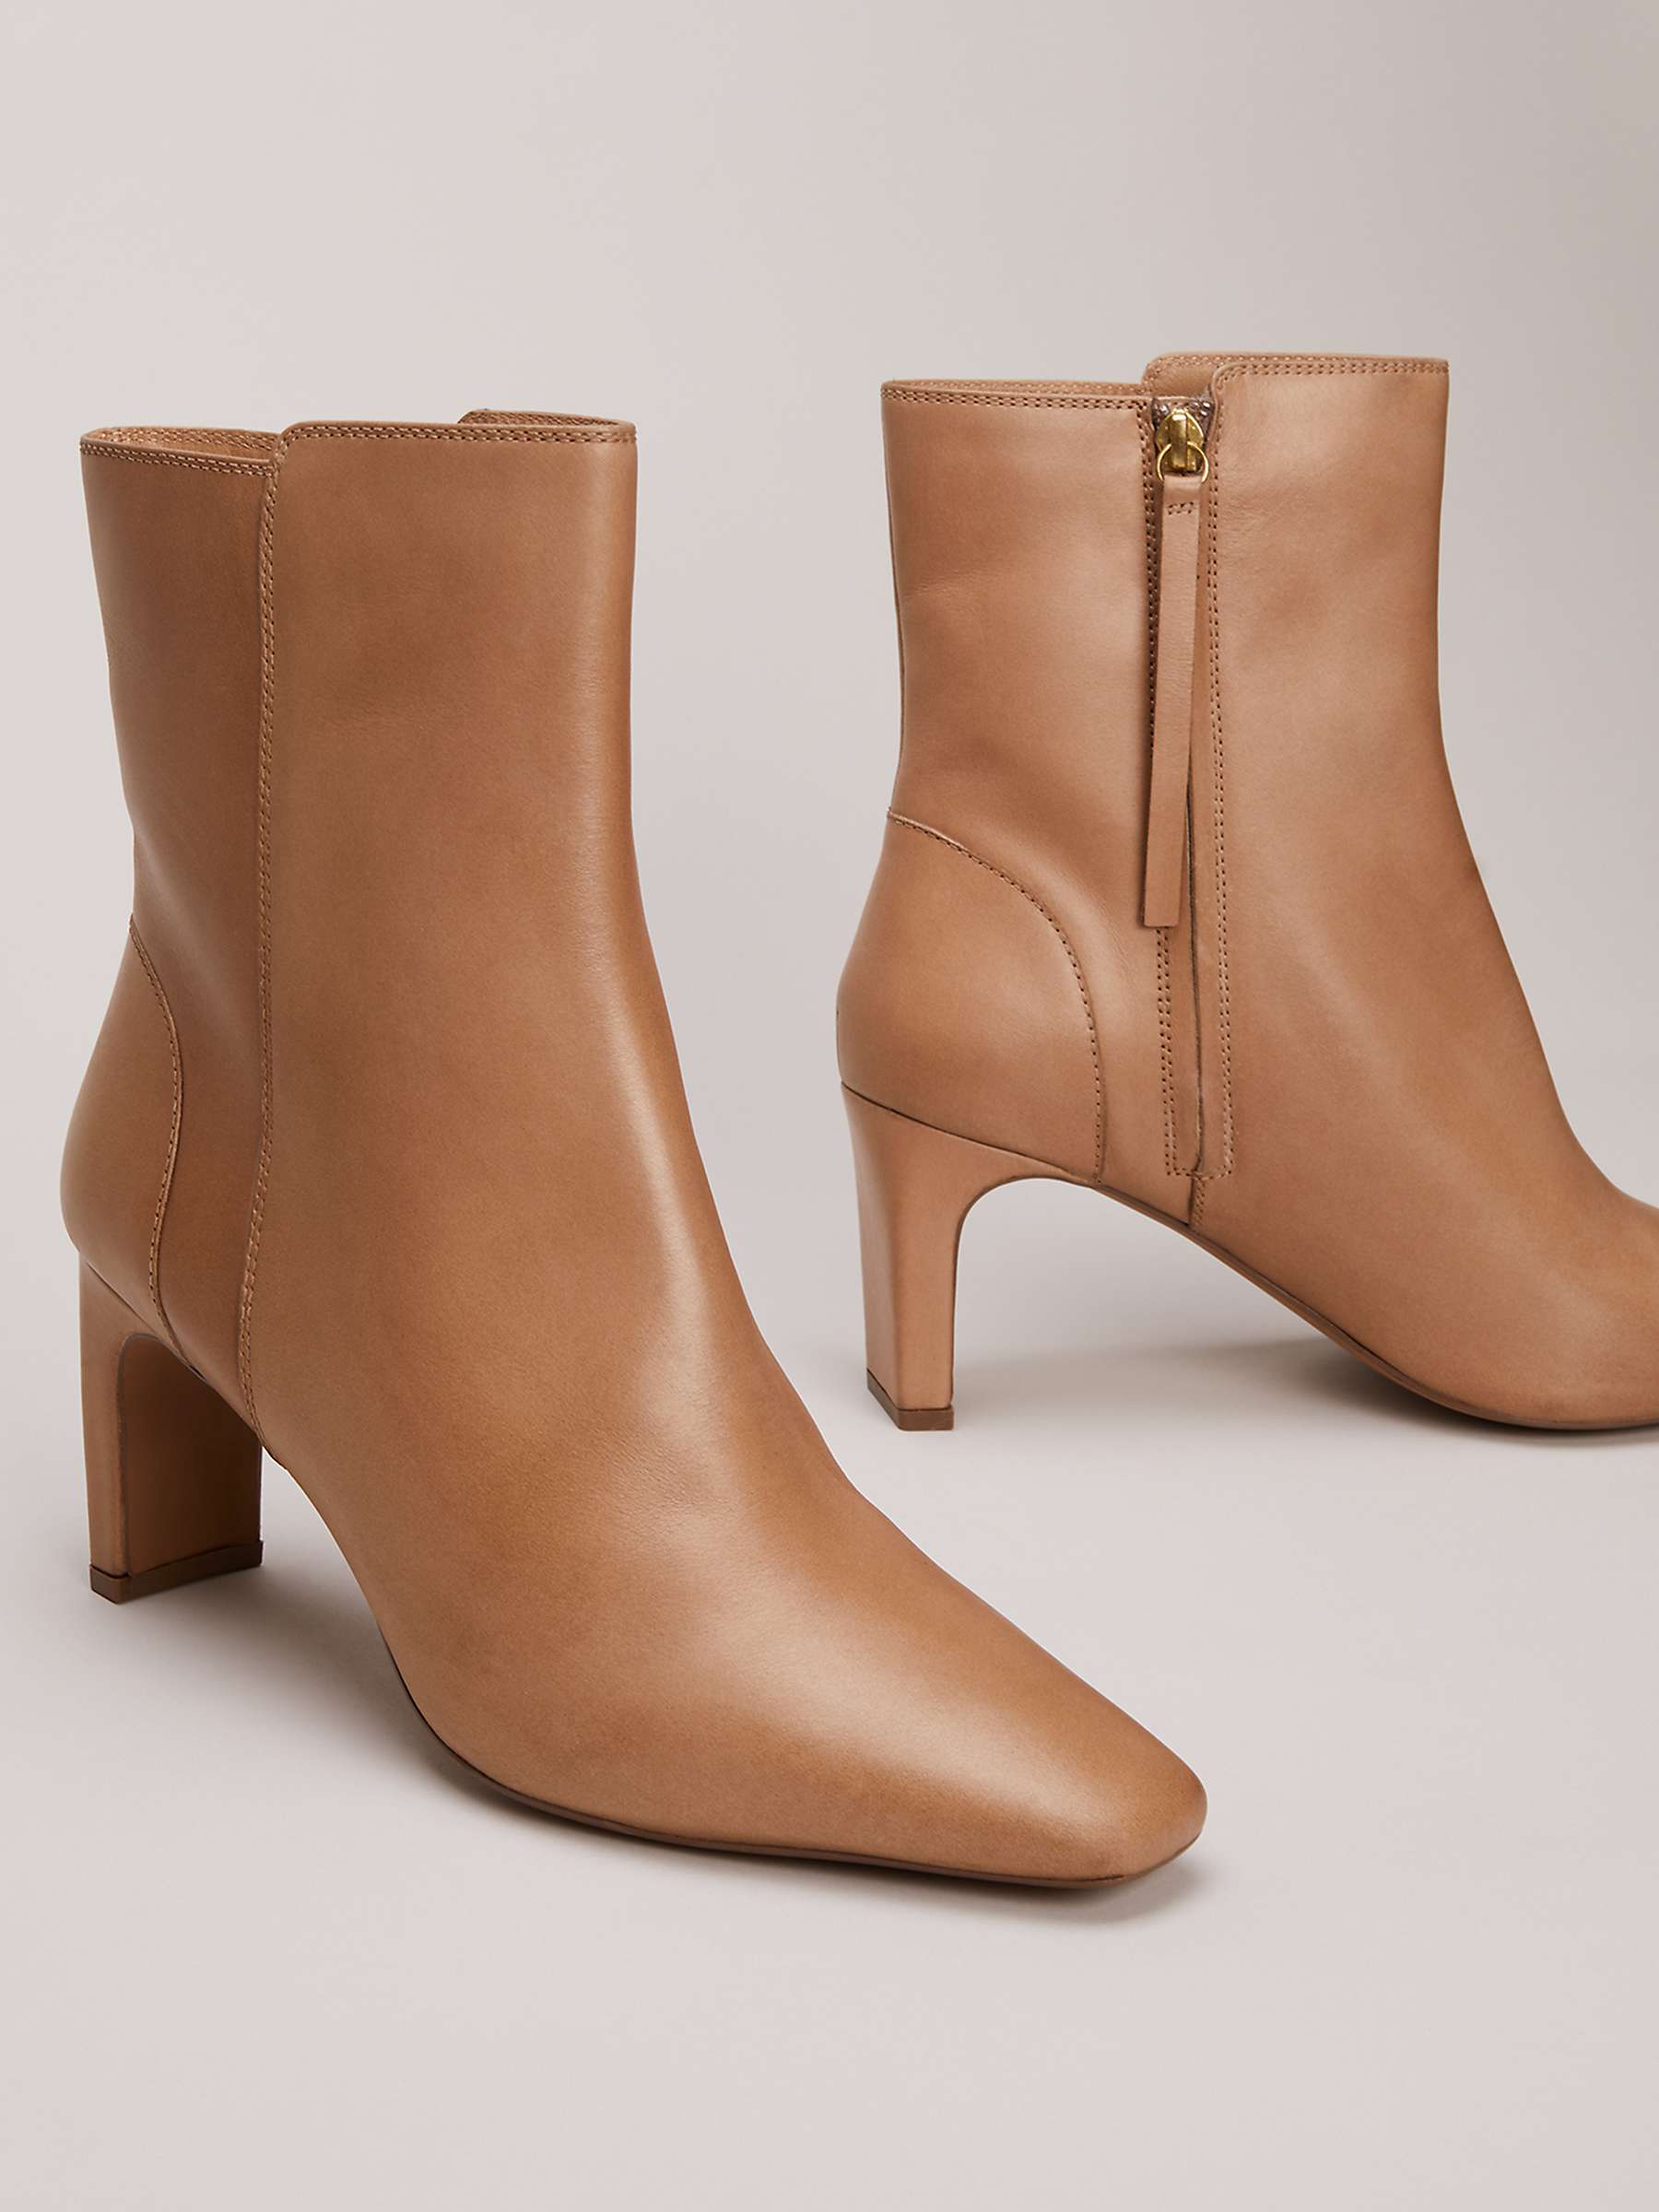 Buy Phase Eight Slim Block Heel Leather Ankle Boots, Light Tan Online at johnlewis.com